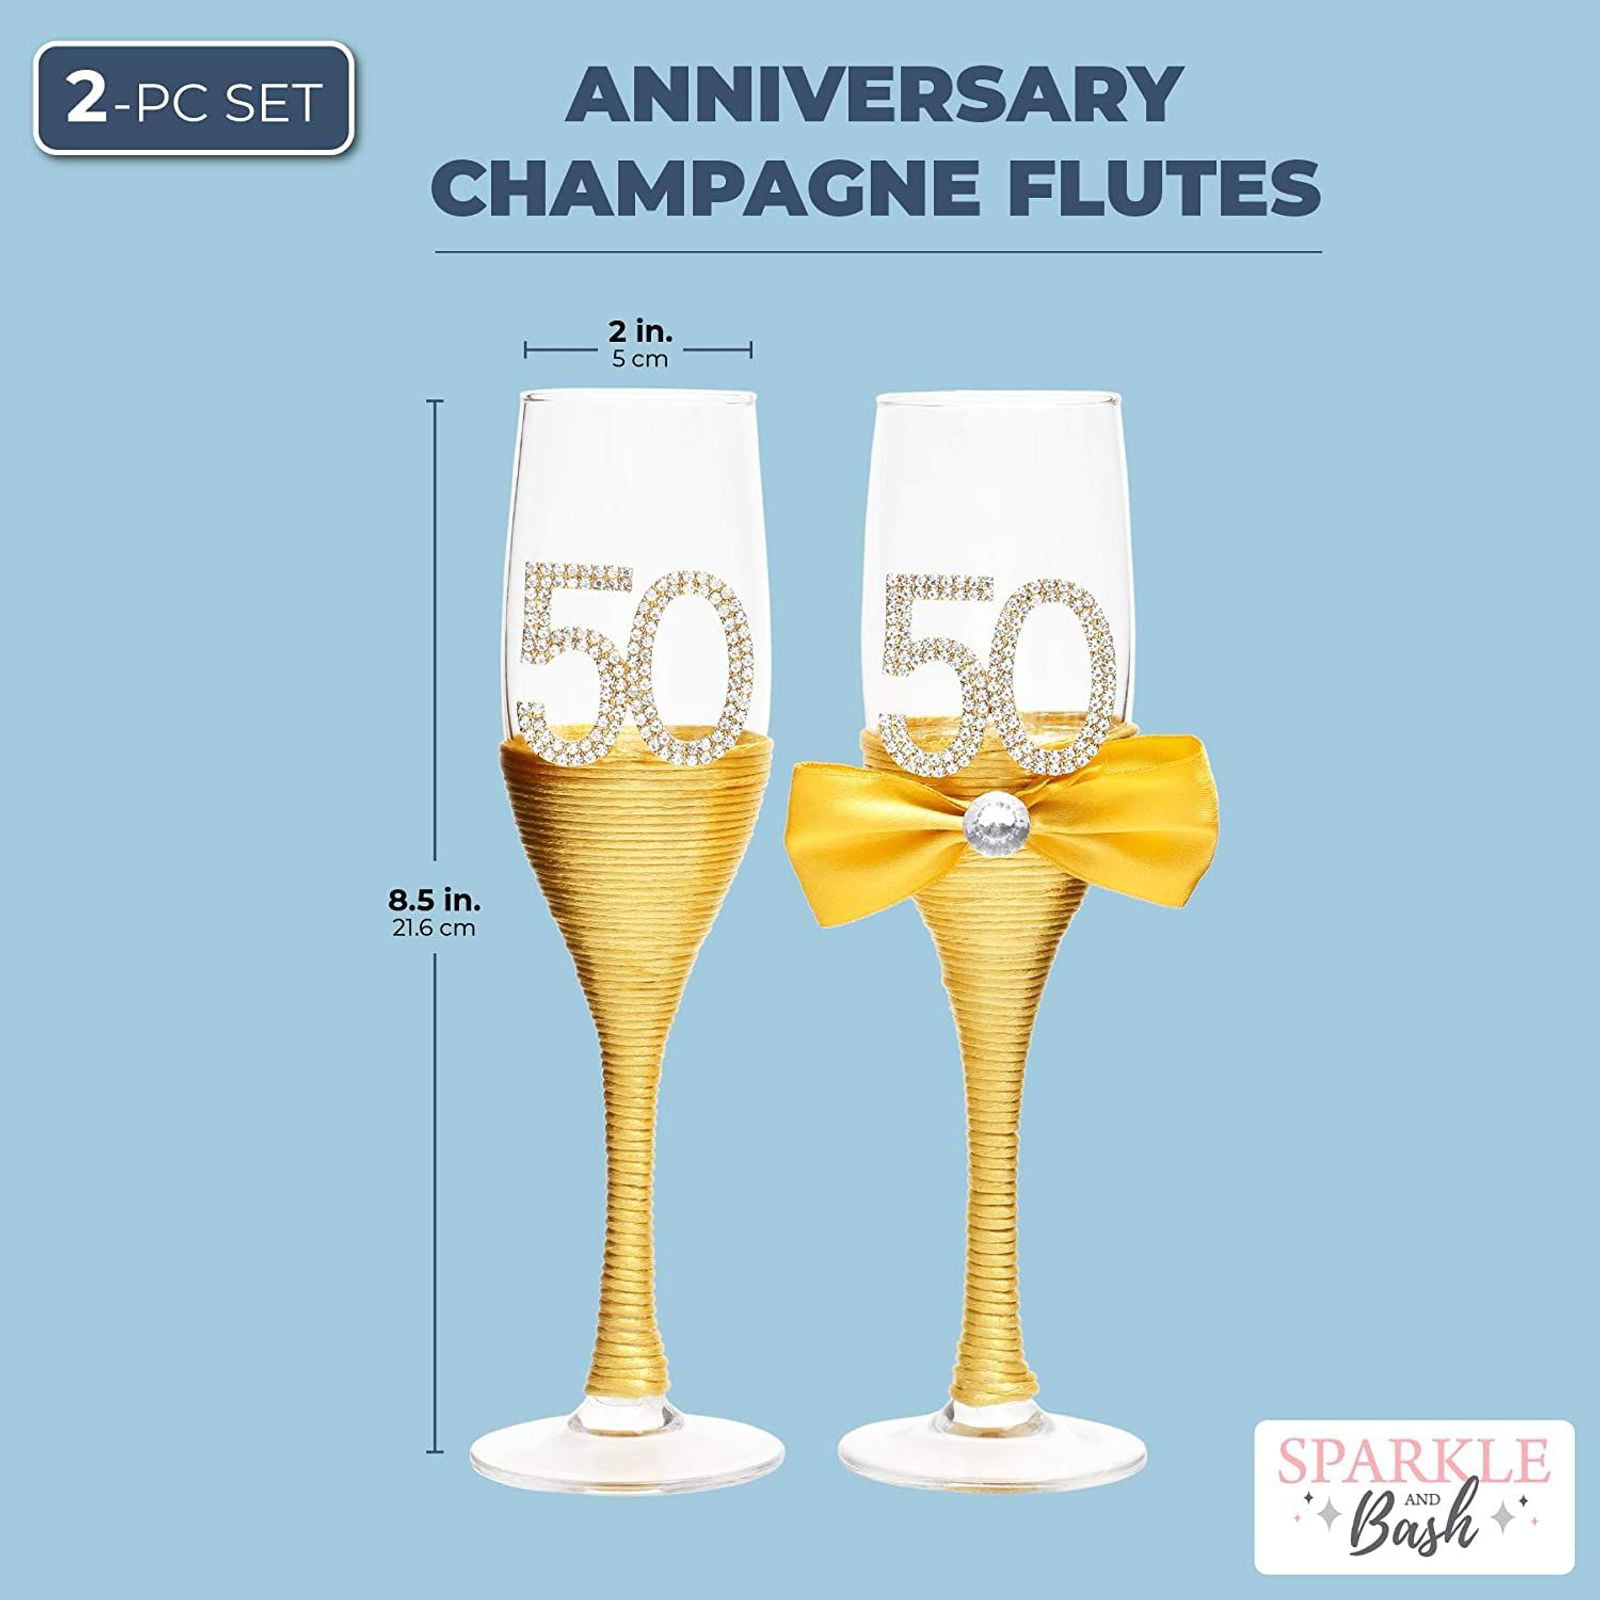 8 oz Engraved Champagne Glasses Set of 2 Wedding Anniversary Champagne Flutes Gift for Married Couples Giftable Wine Glasses for Parents 50th Anniversary Gifts for Couple by Sweetzer & Orange